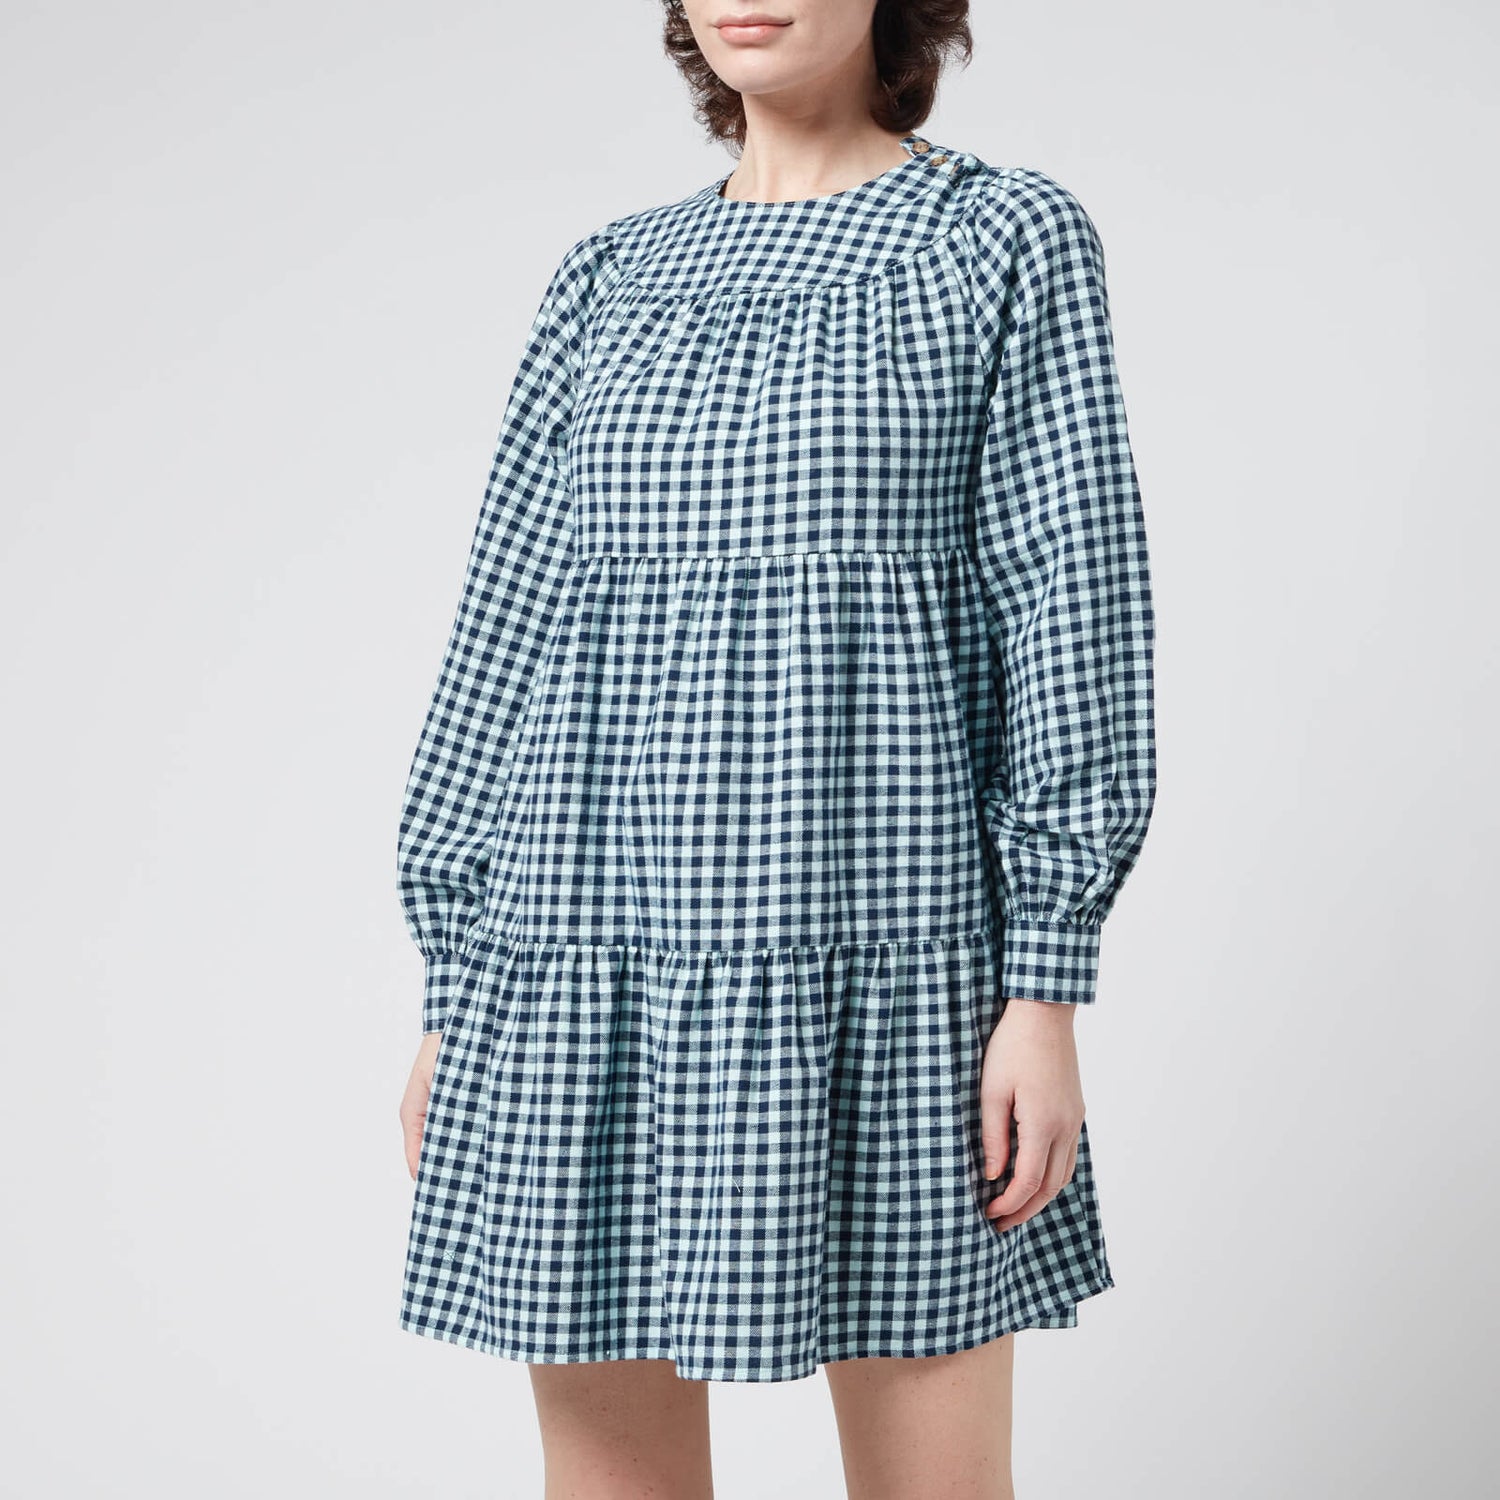 Whistles Women's Gingham Check Tiered Trapeze Dress - Multi